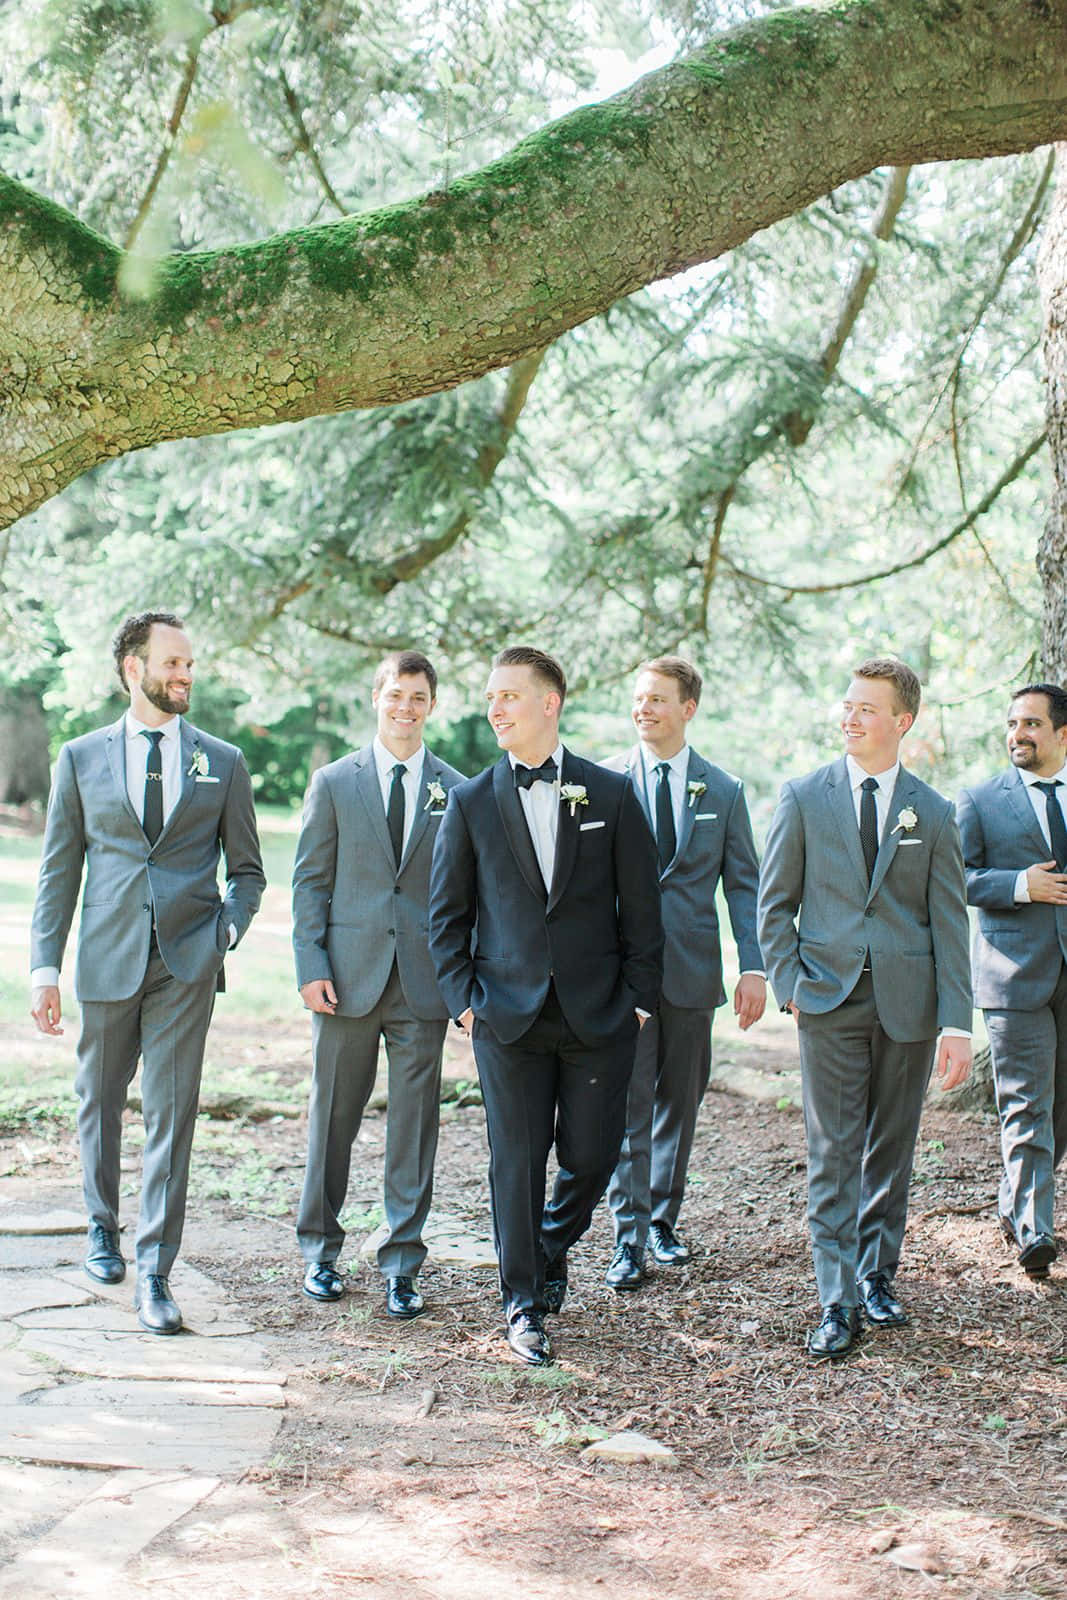 The Groomsmen Celebrating the Couple's Special Day